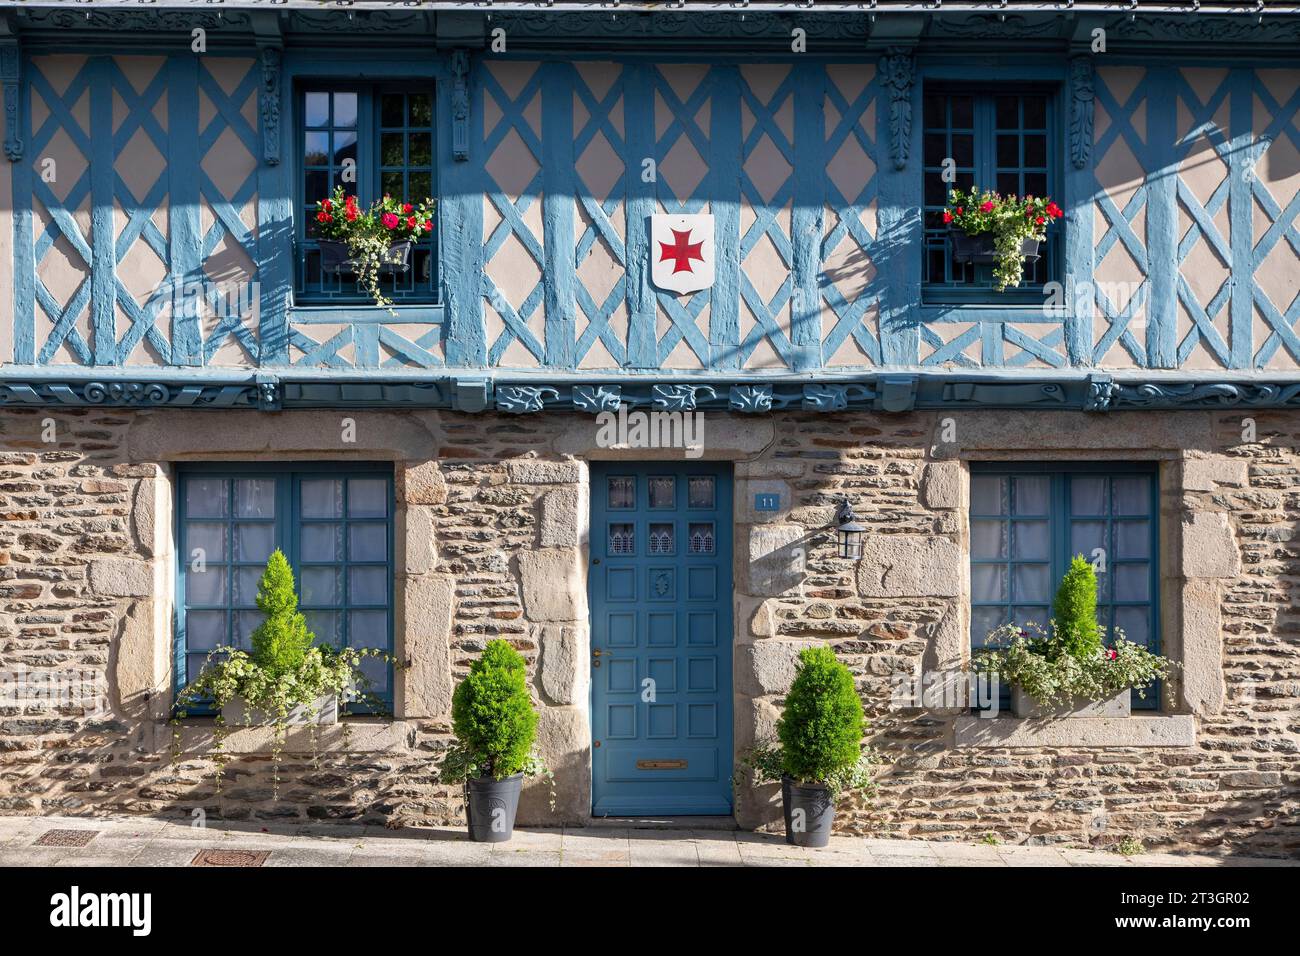 France, Morbihan, Josselin, rue des Vierges, half-timbered houses, former merchant homes dating from the 16th century Stock Photo